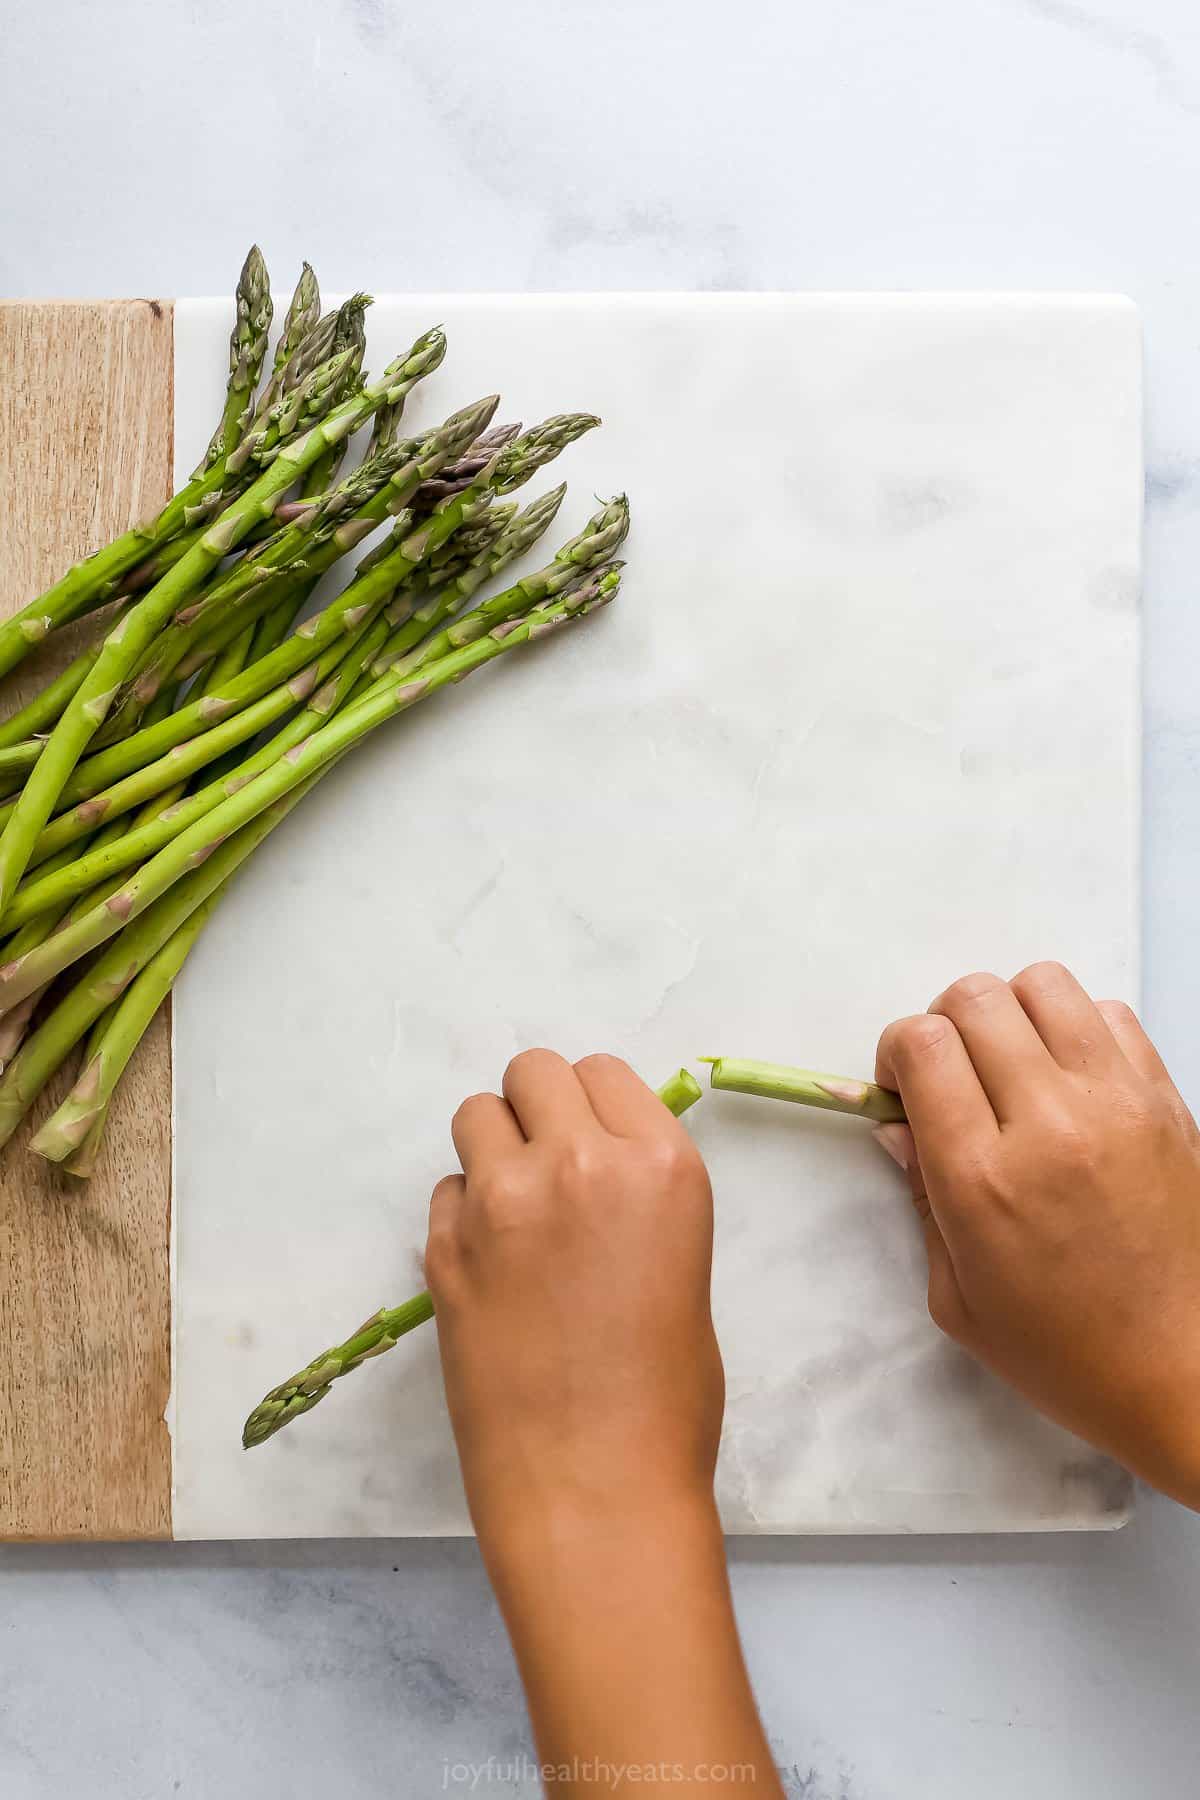 A pair of hands snapping the tough end off of an asparagus stalk